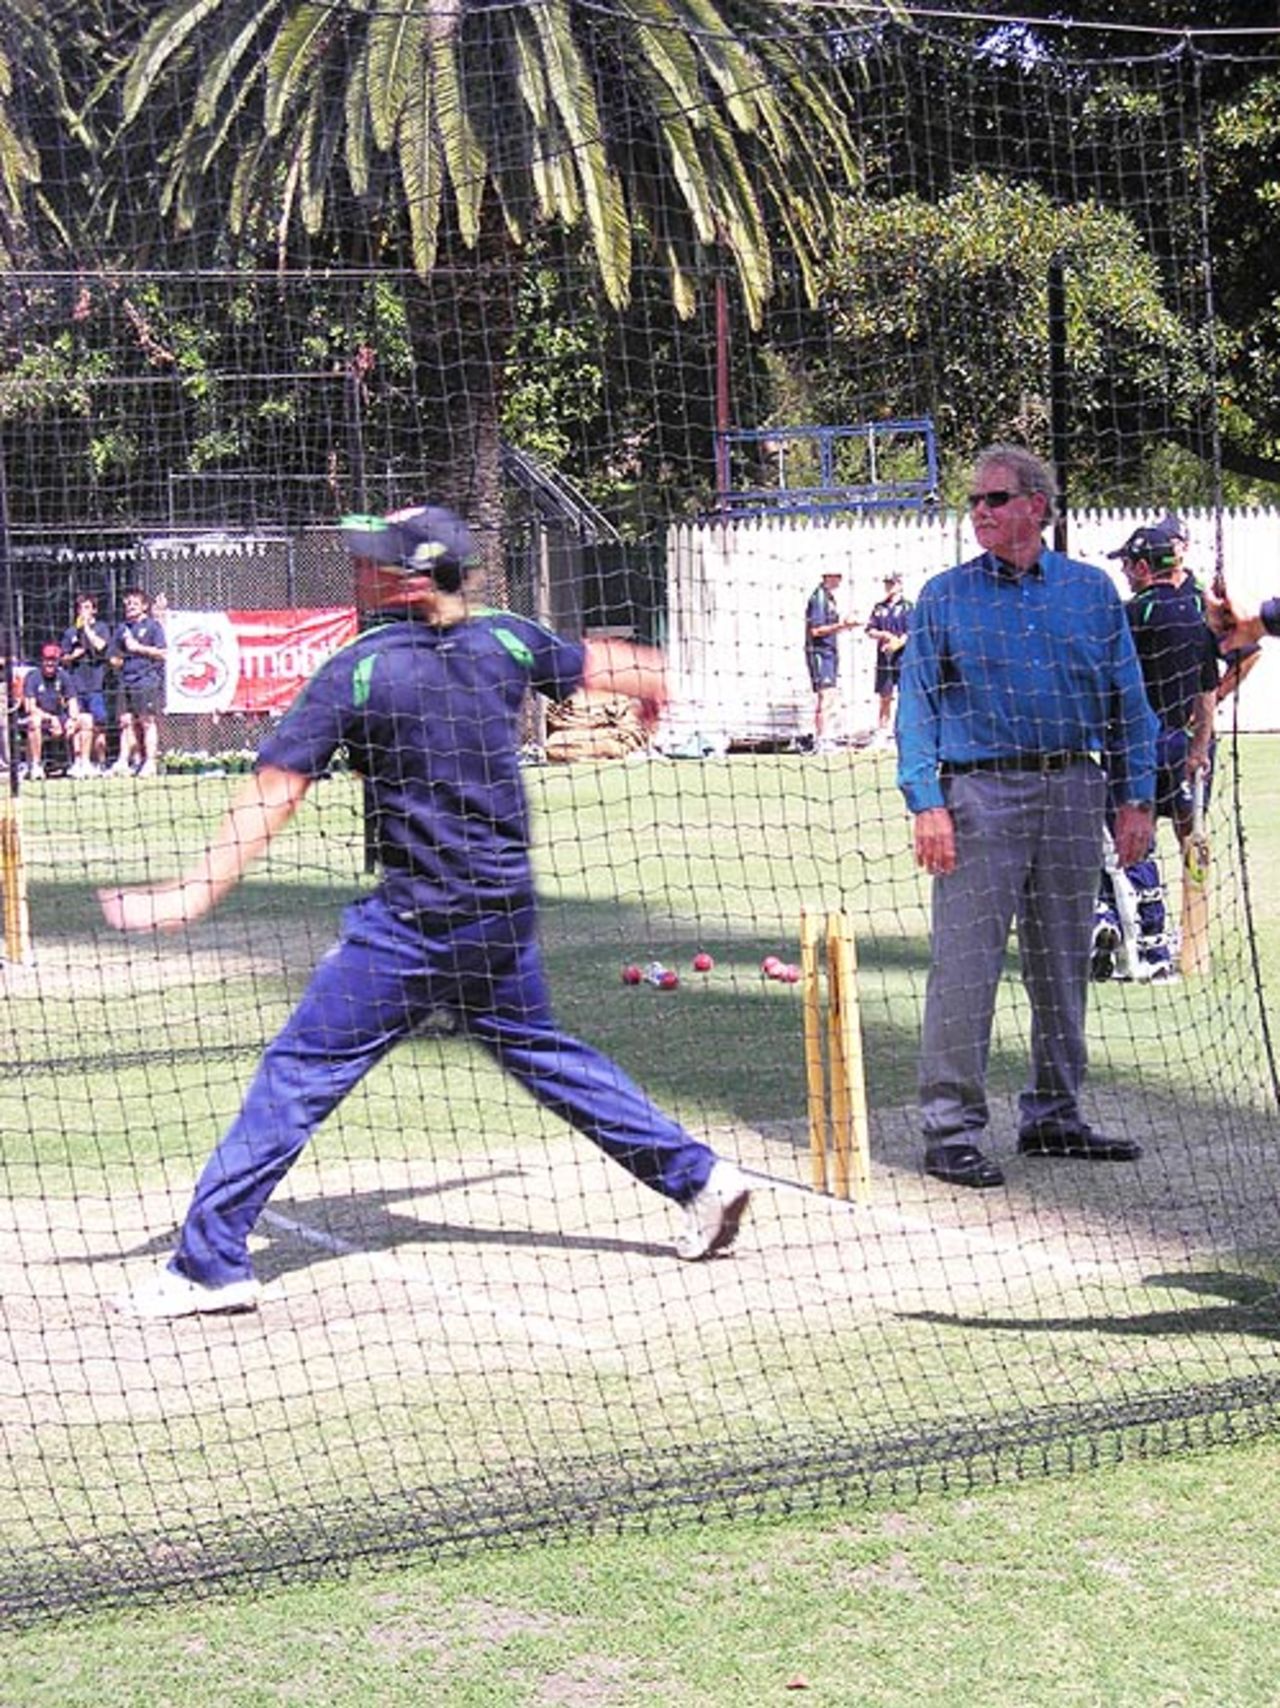 Terry Jenner watches on as Shane Warne bowls during Australia's net session, Adelaide, November 30, 2006